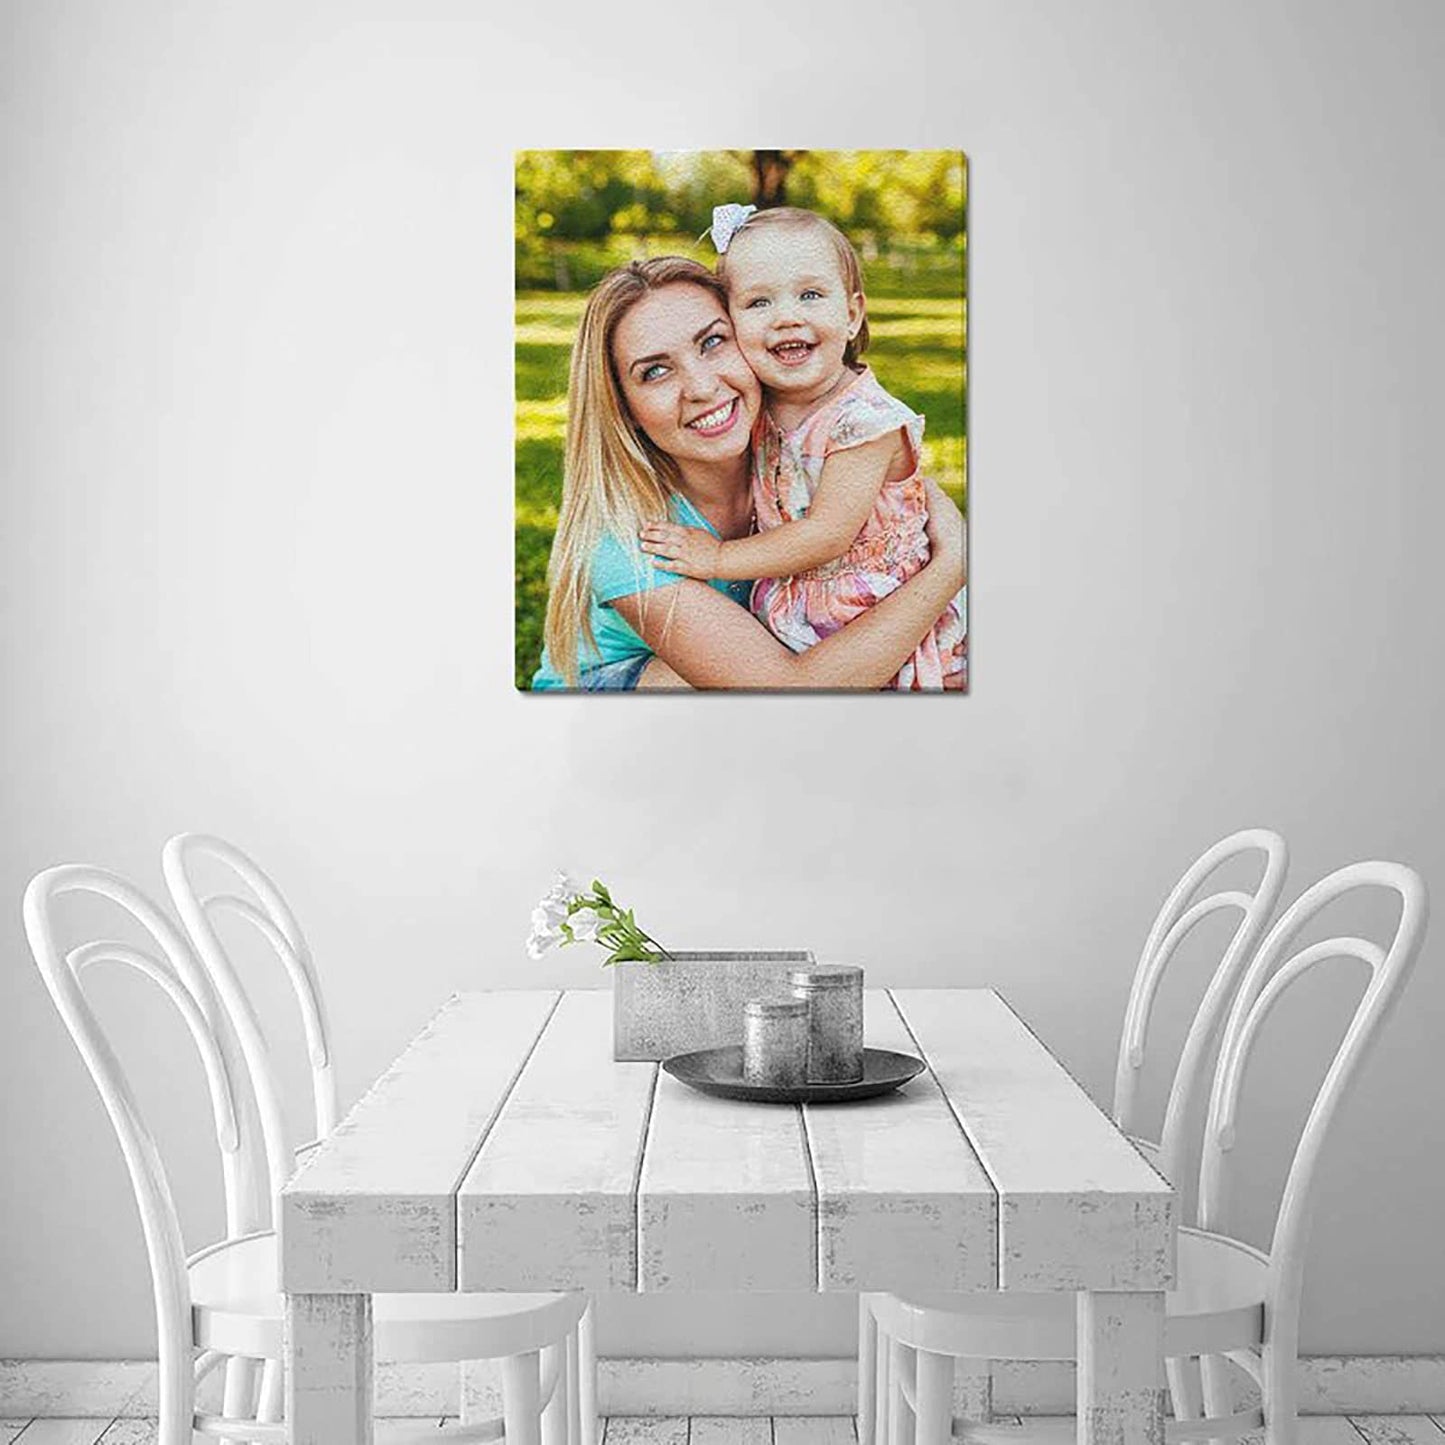 Personalized Canvas Print with Photo Text, Custom Picture Poster Print for Wall, Customized Framed Wall Art Photo Gifts-8" x 10"